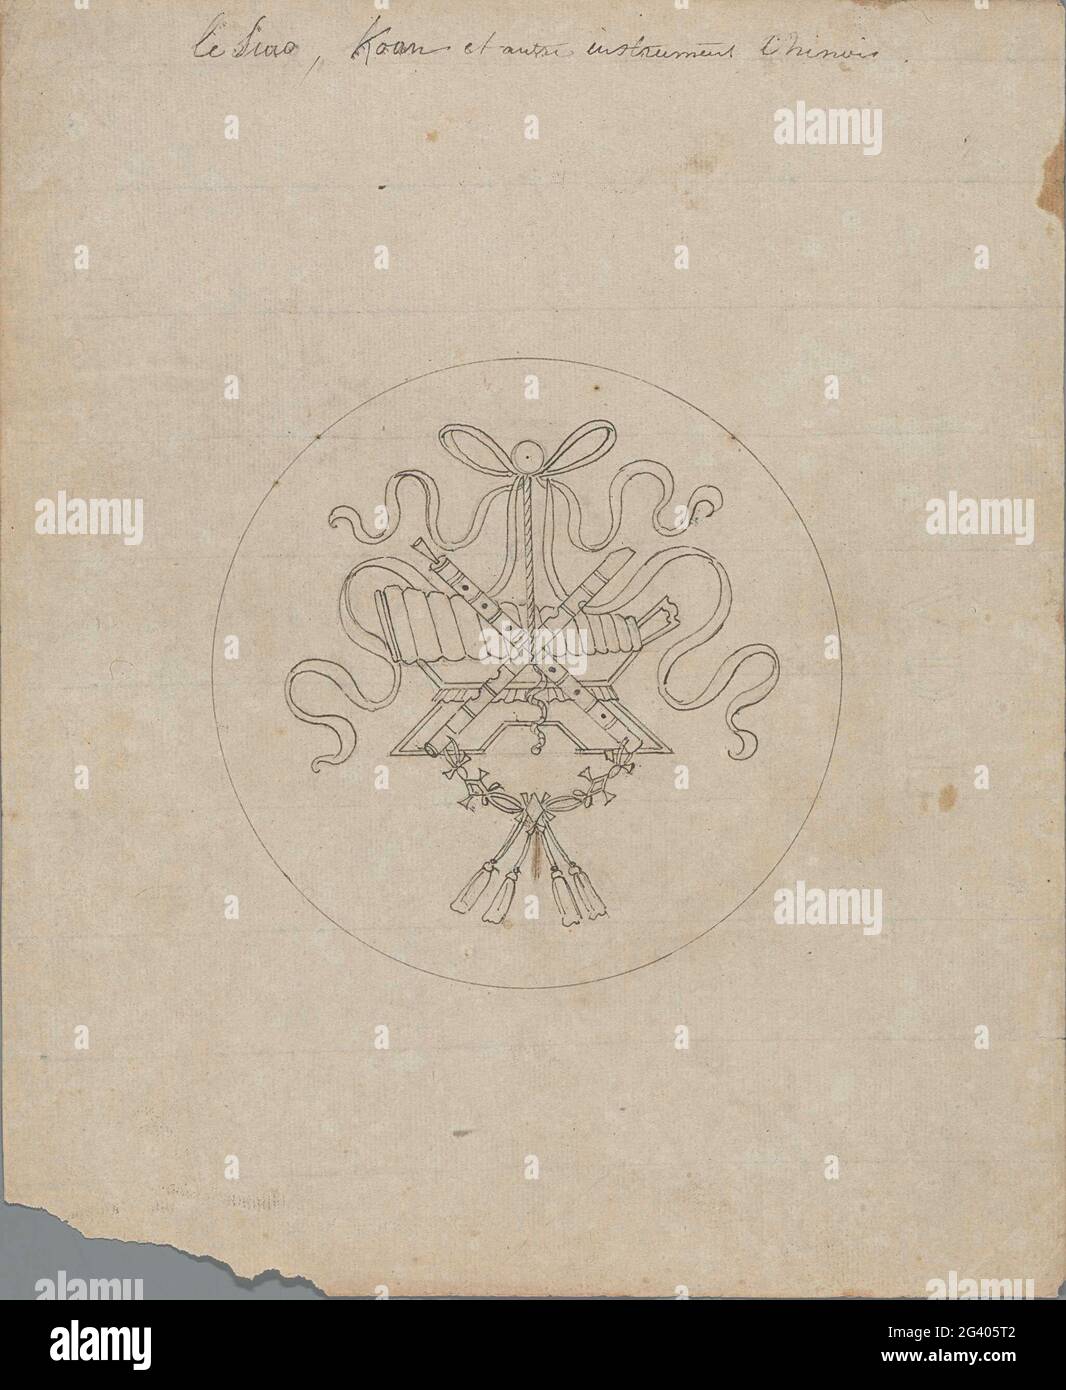 Le Sino [?], Koan et Autore Instrument Chinois; Design for marquetery of  musical instrument hung up to ribbons in around medallion. One of 103  designs for marquetics of ribbons hung musical instruments